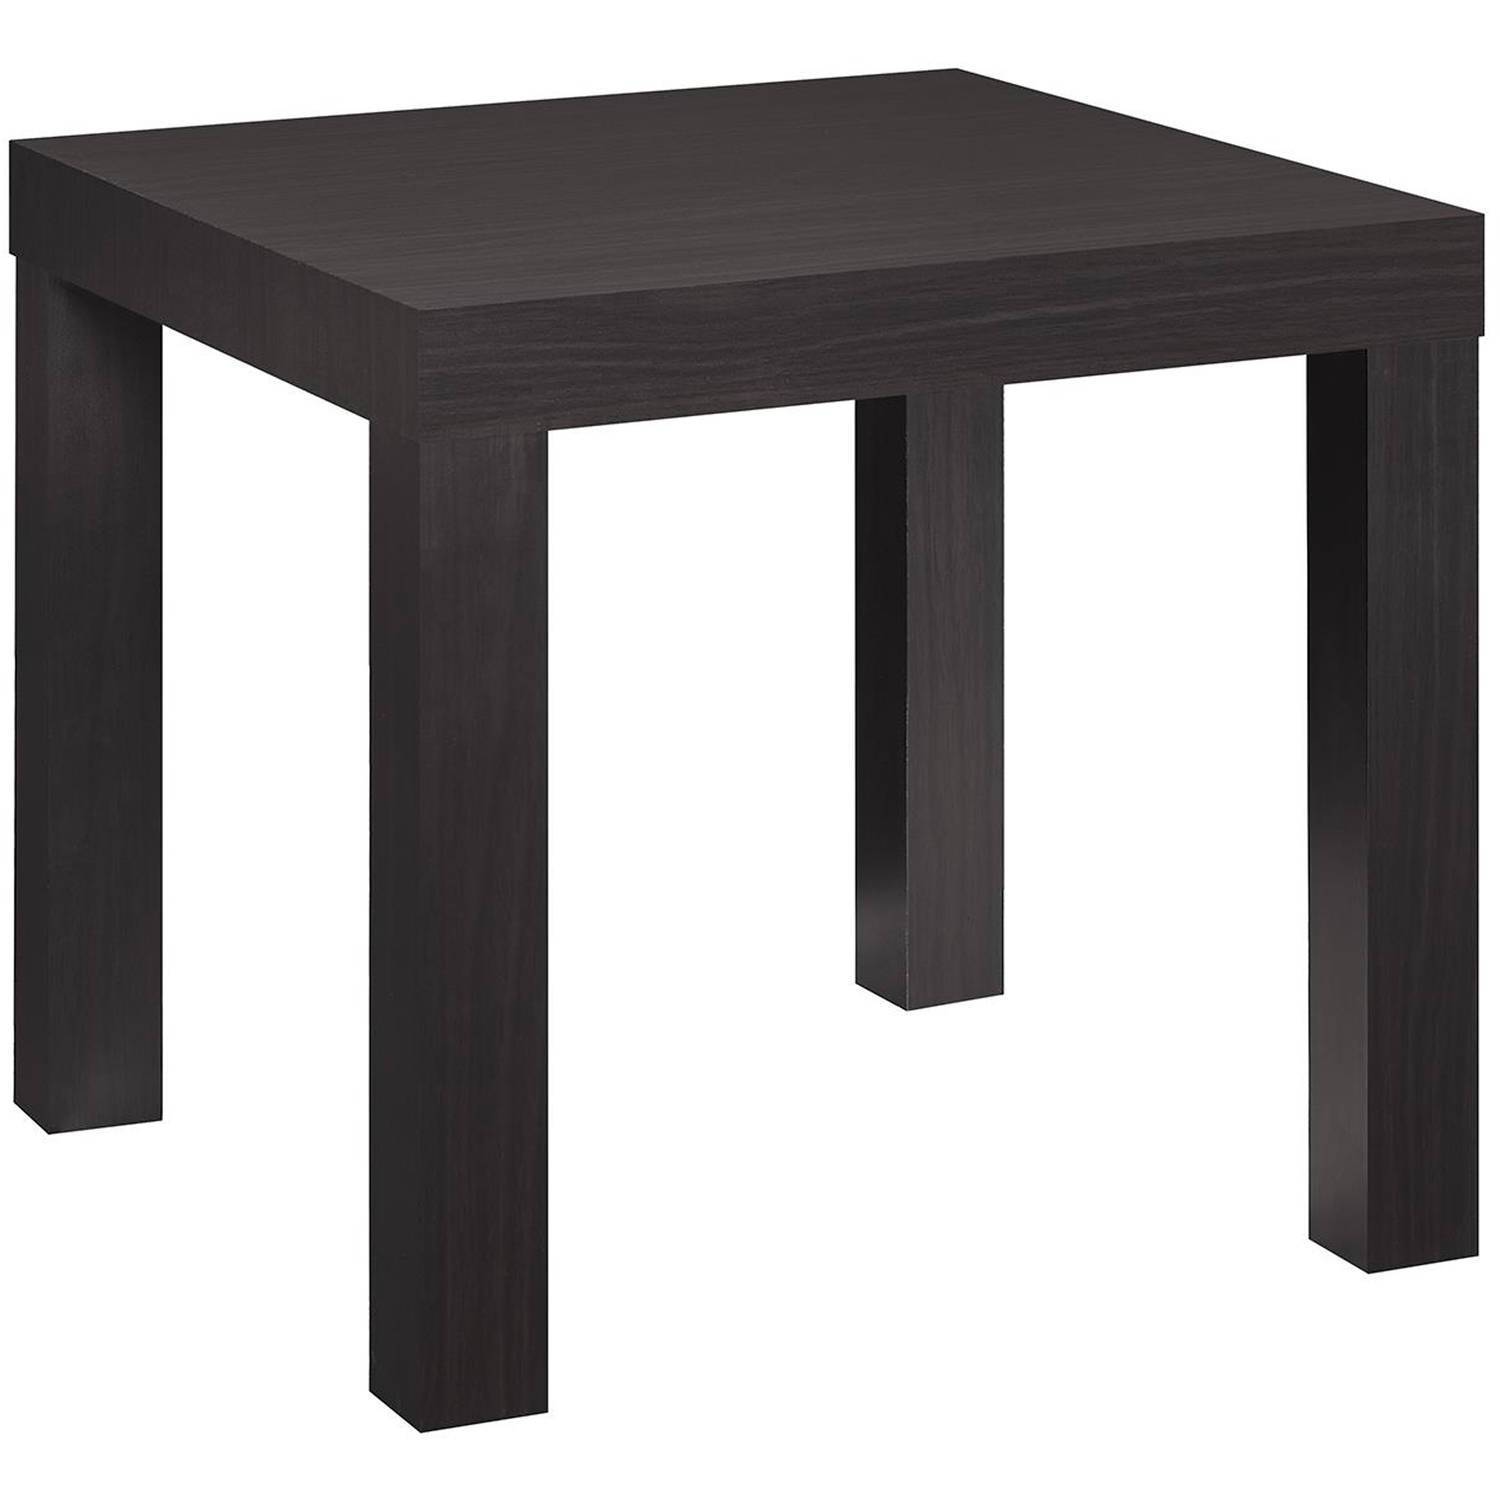 nesting tables piece mainstays wooden living room furniture black and wood end table actual color oak solid bedside dining models with glass top dog out stanley european cottage